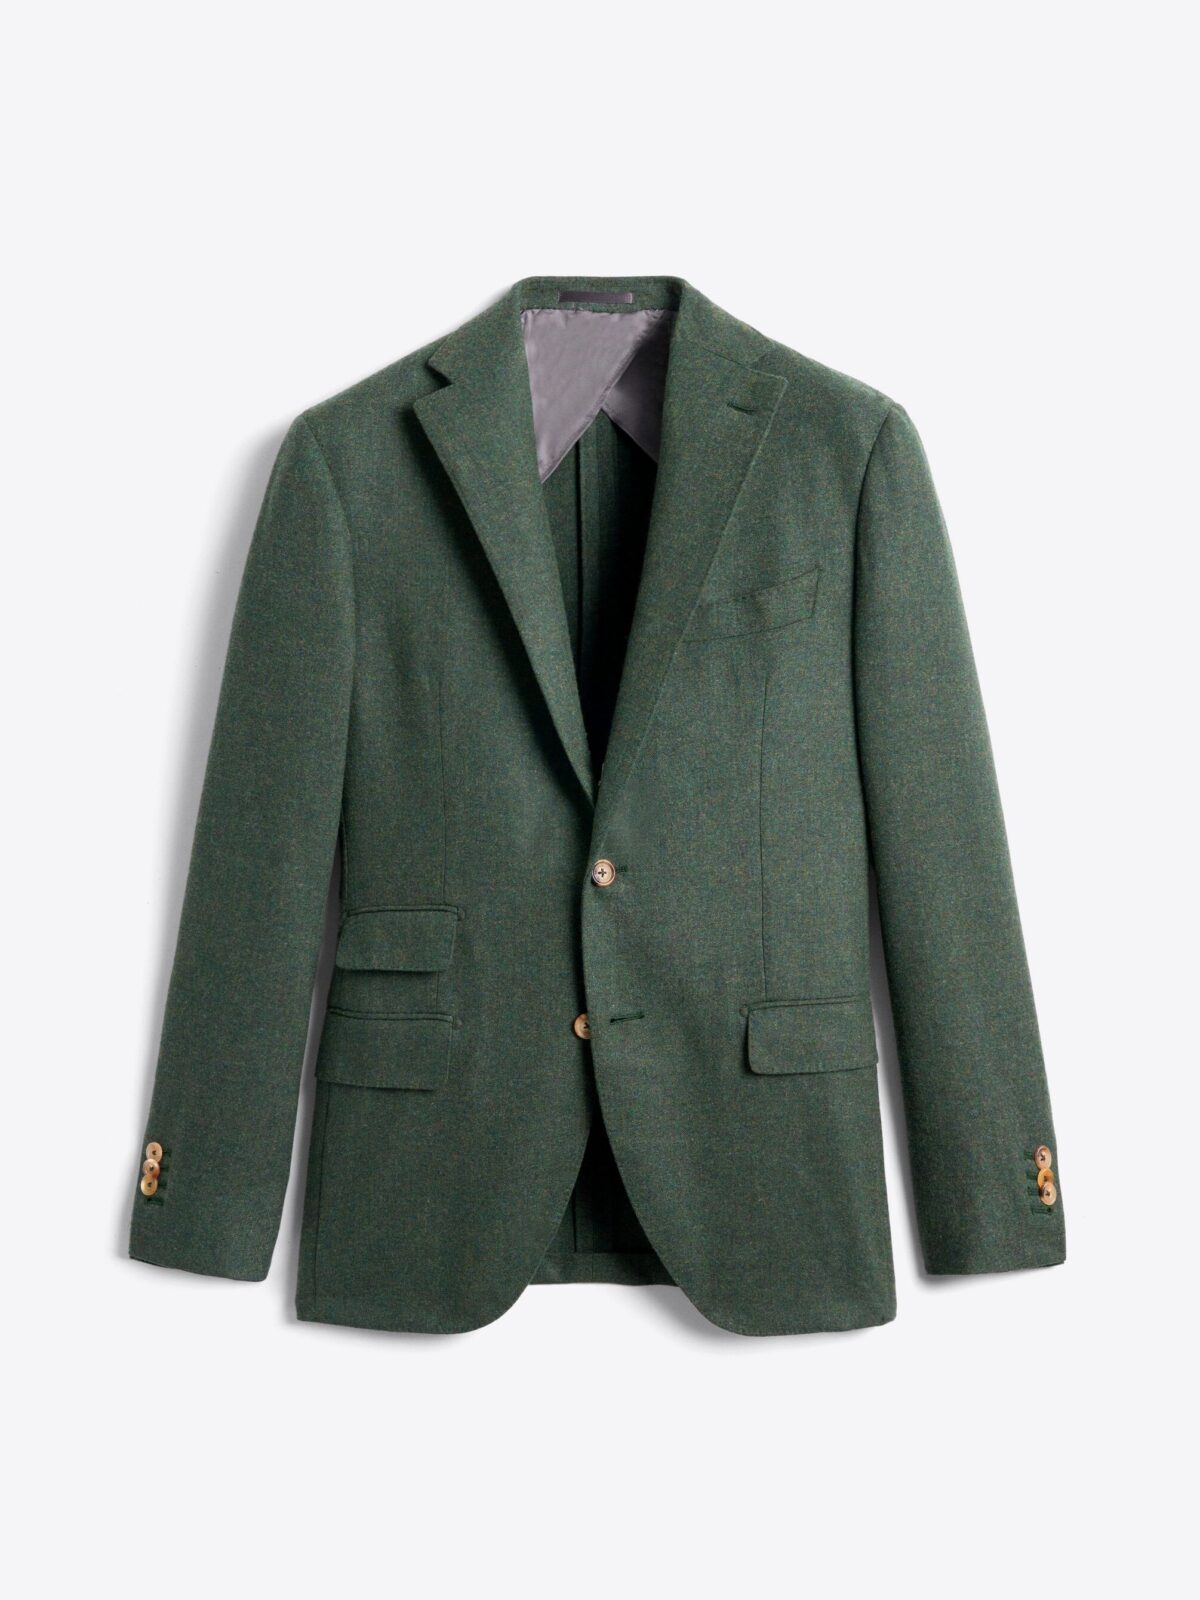 Italian Wool Cashmere Double Breasted Tailored Coat